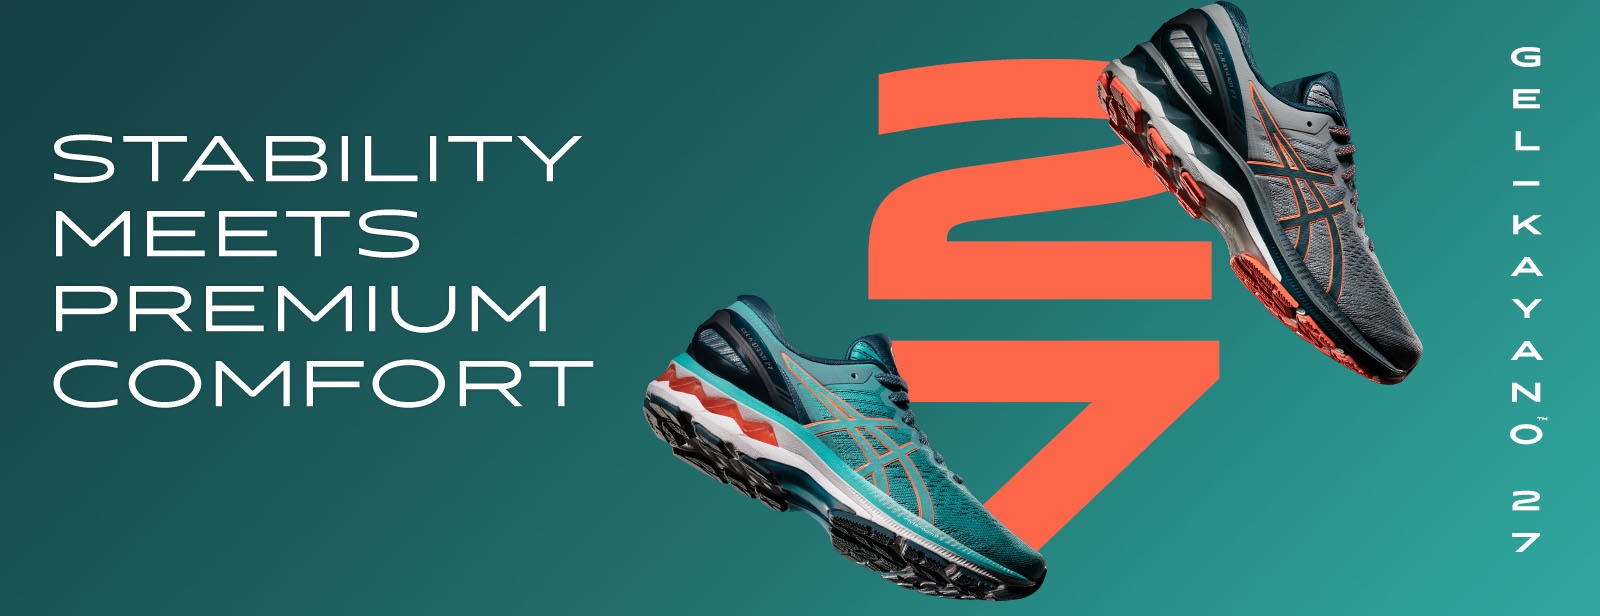 ASICS Vietnam | Official Running Shoes & Clothing